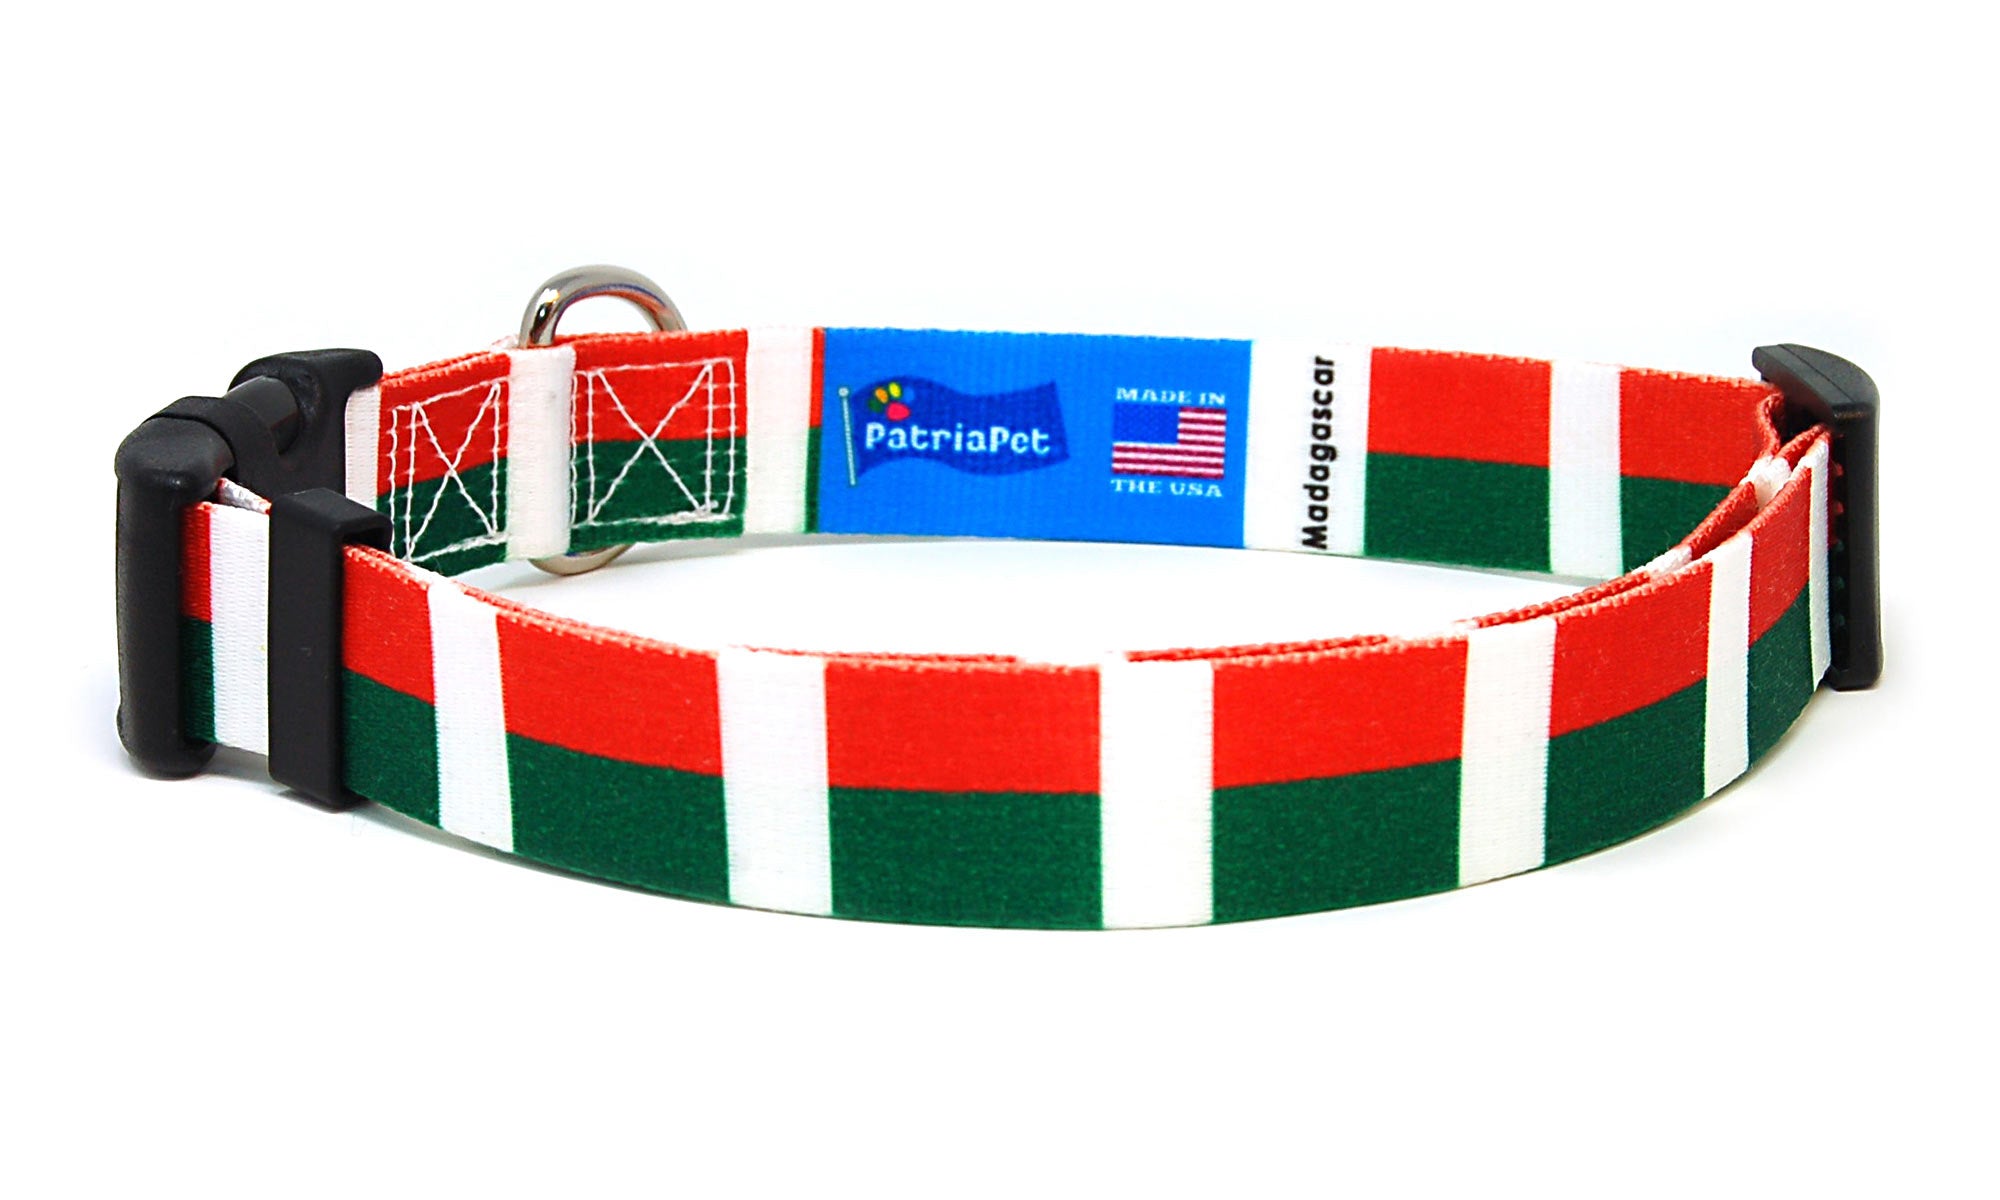 Madagascar Dog Collar | Quick Release or Martingale Style | Made in NJ, USA